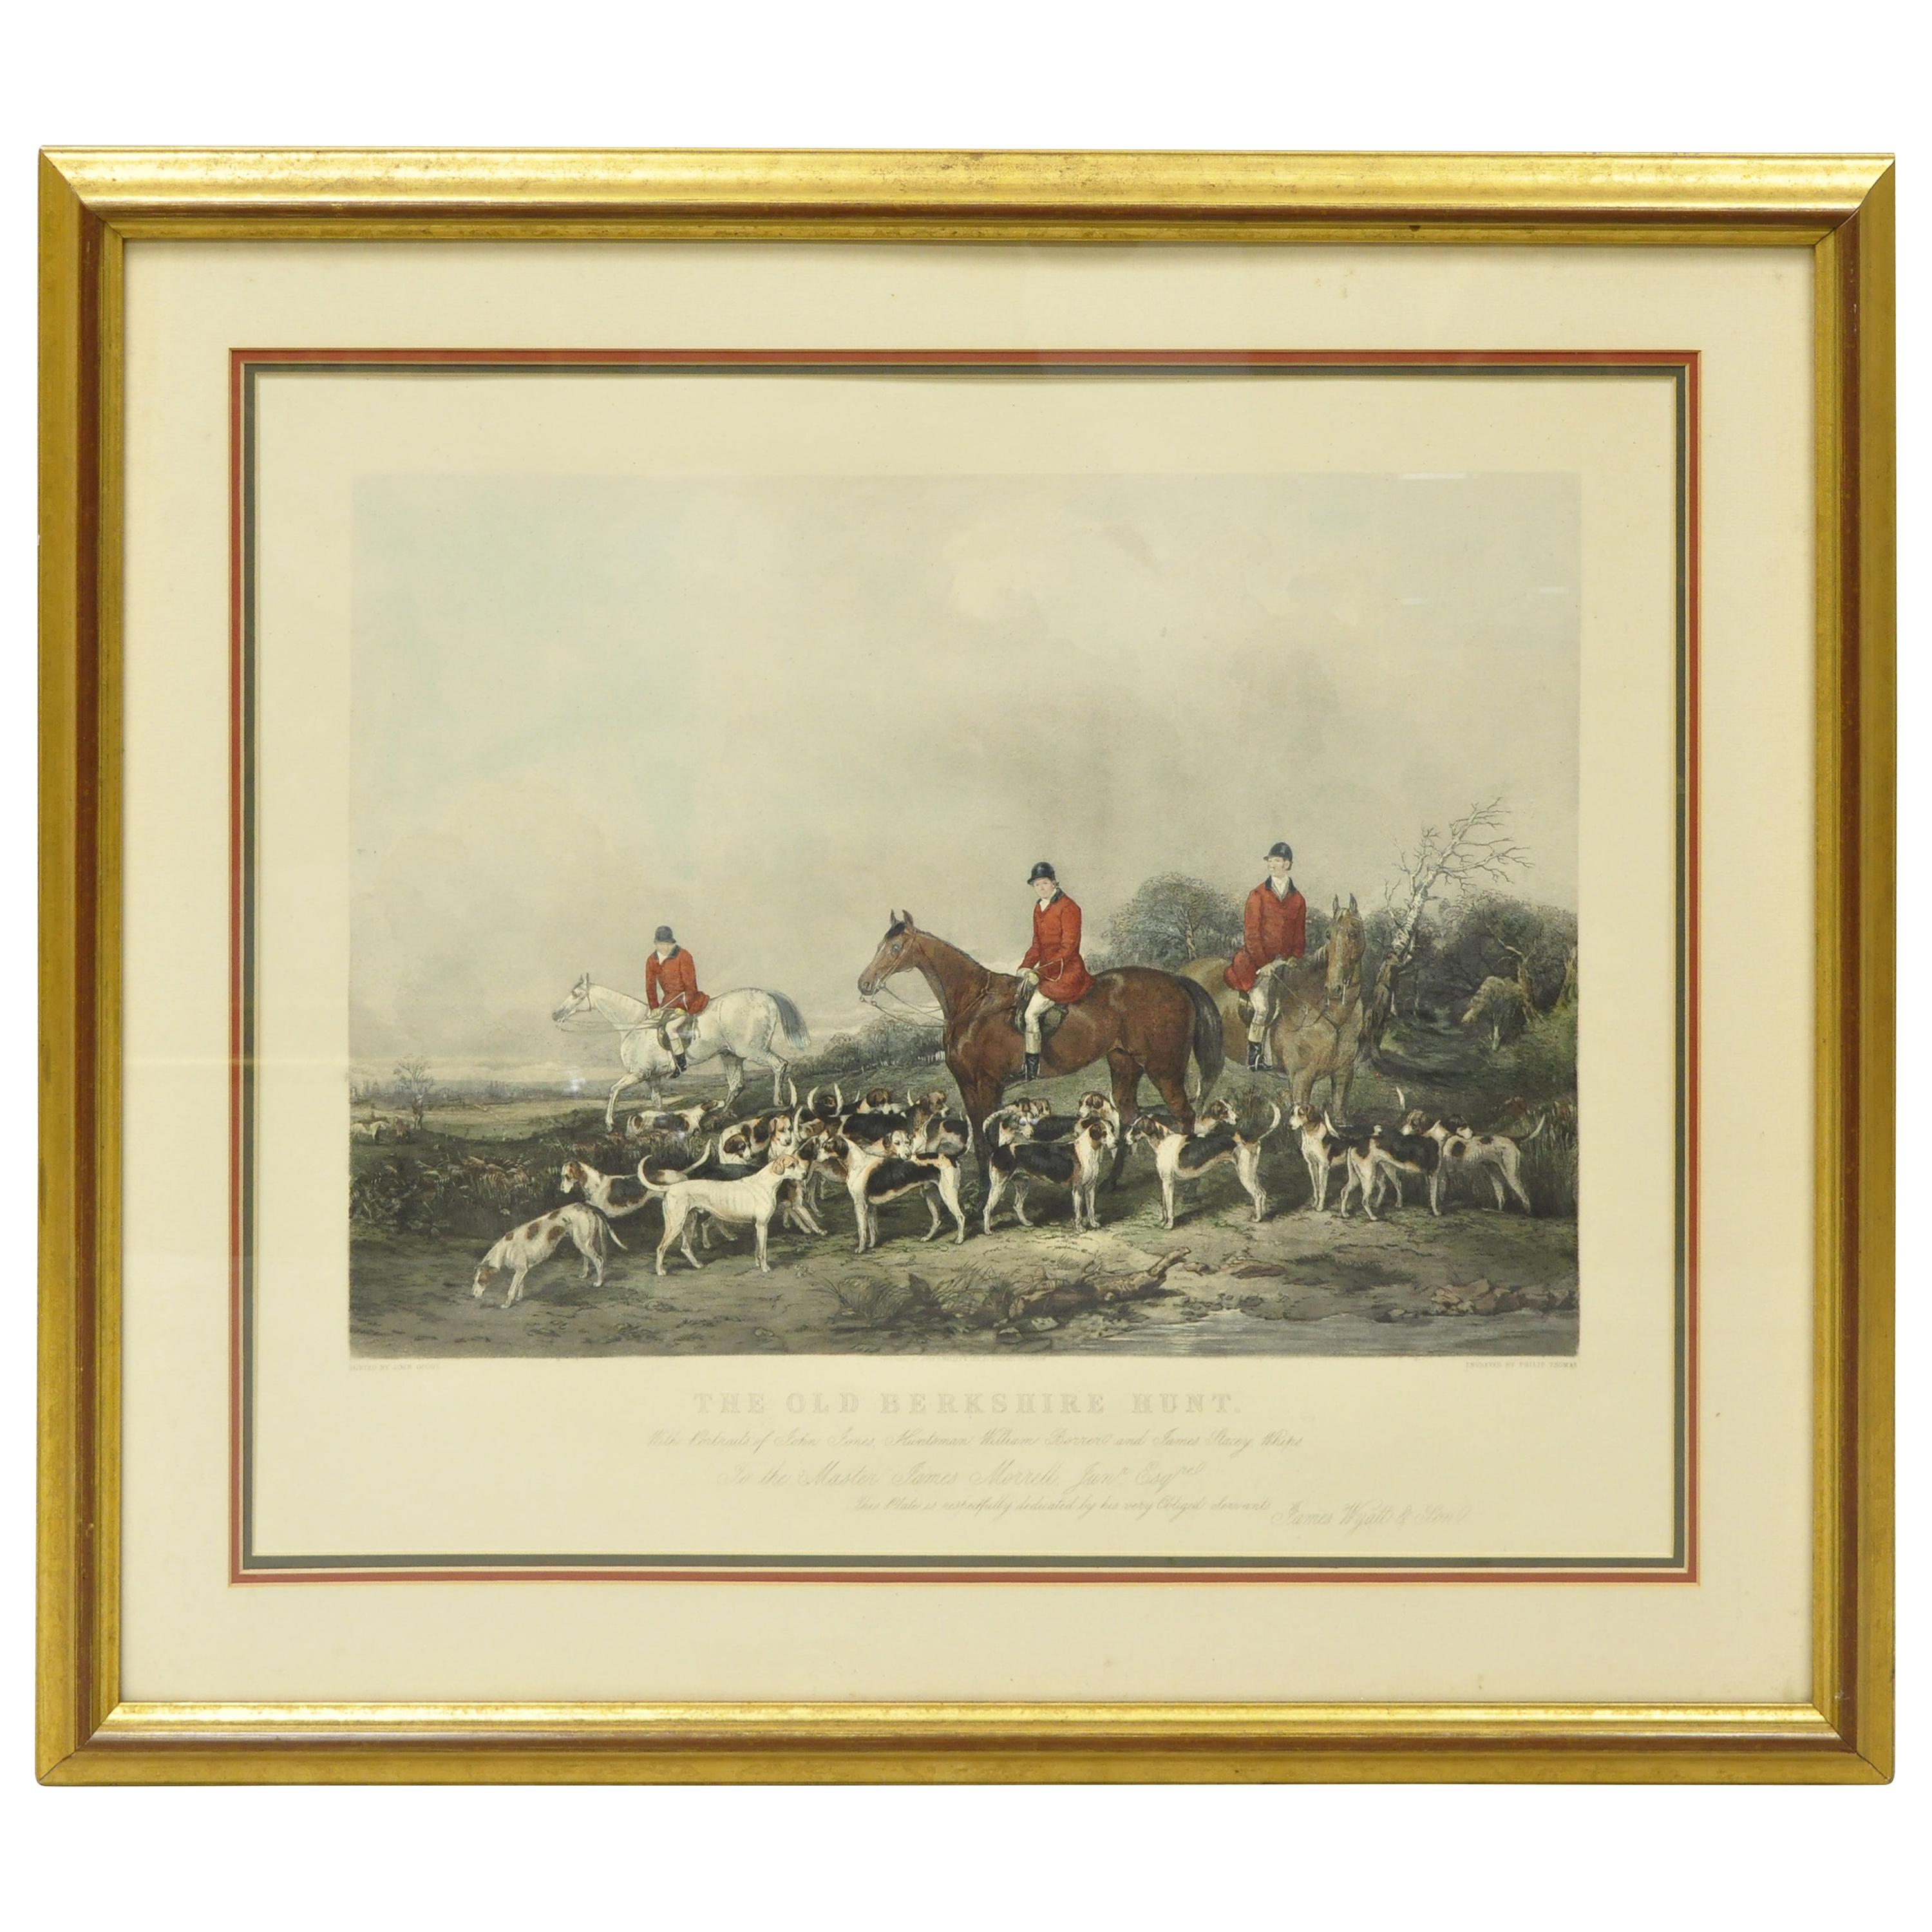 Old Berkshire Hunt Lithograph Framed Print Painting by John Goode Engraved